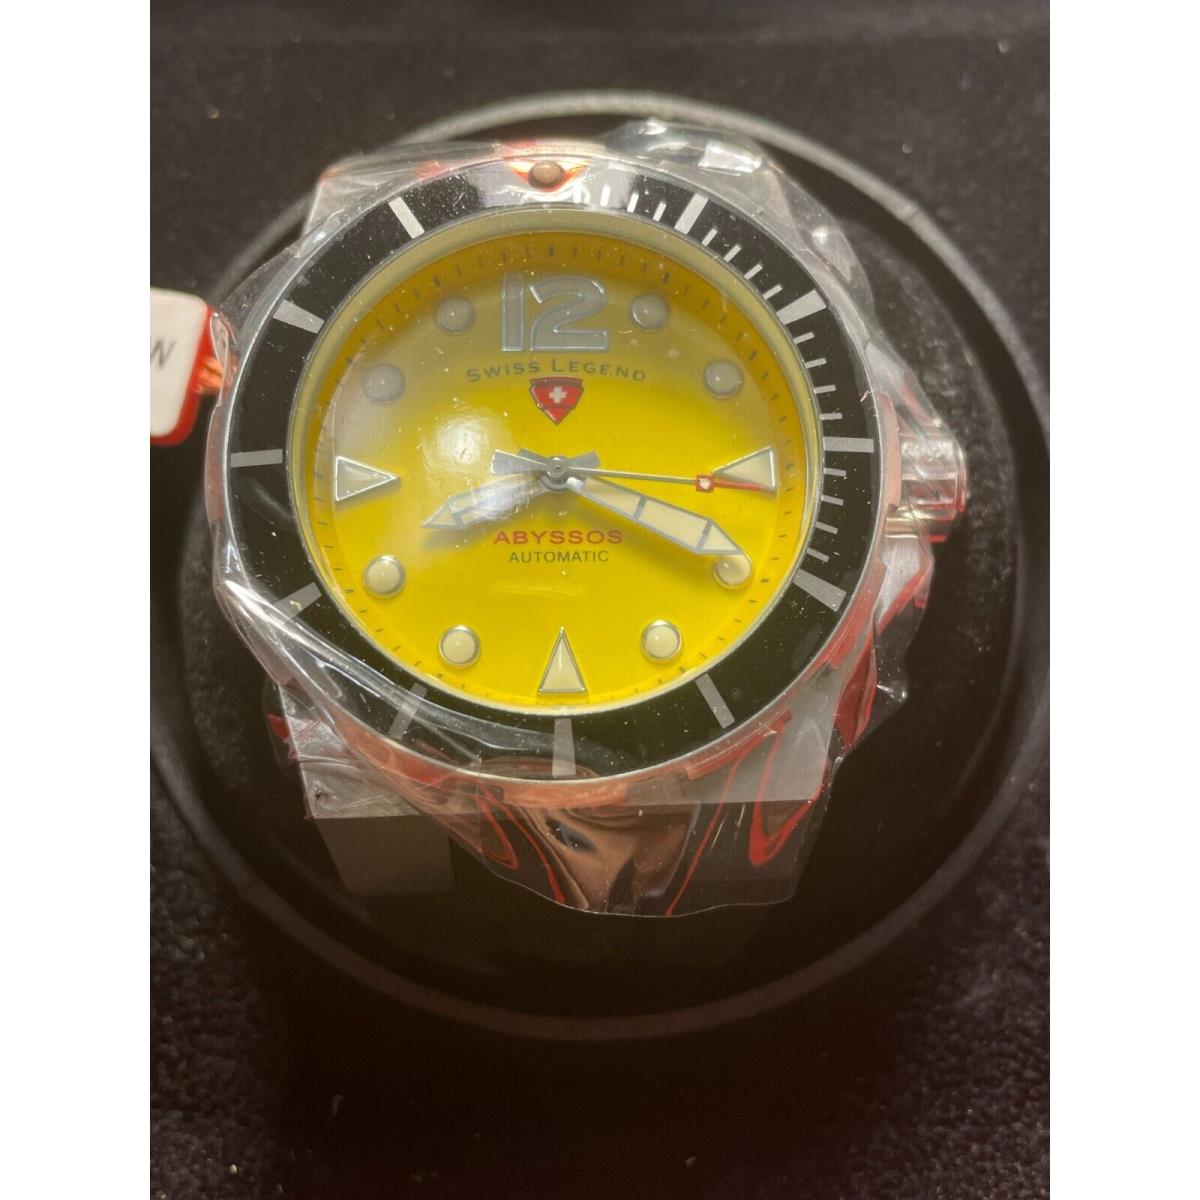 Swiss Legend Automatic Abyssos Dive Watch with Winder. 3300 Feet Swiss